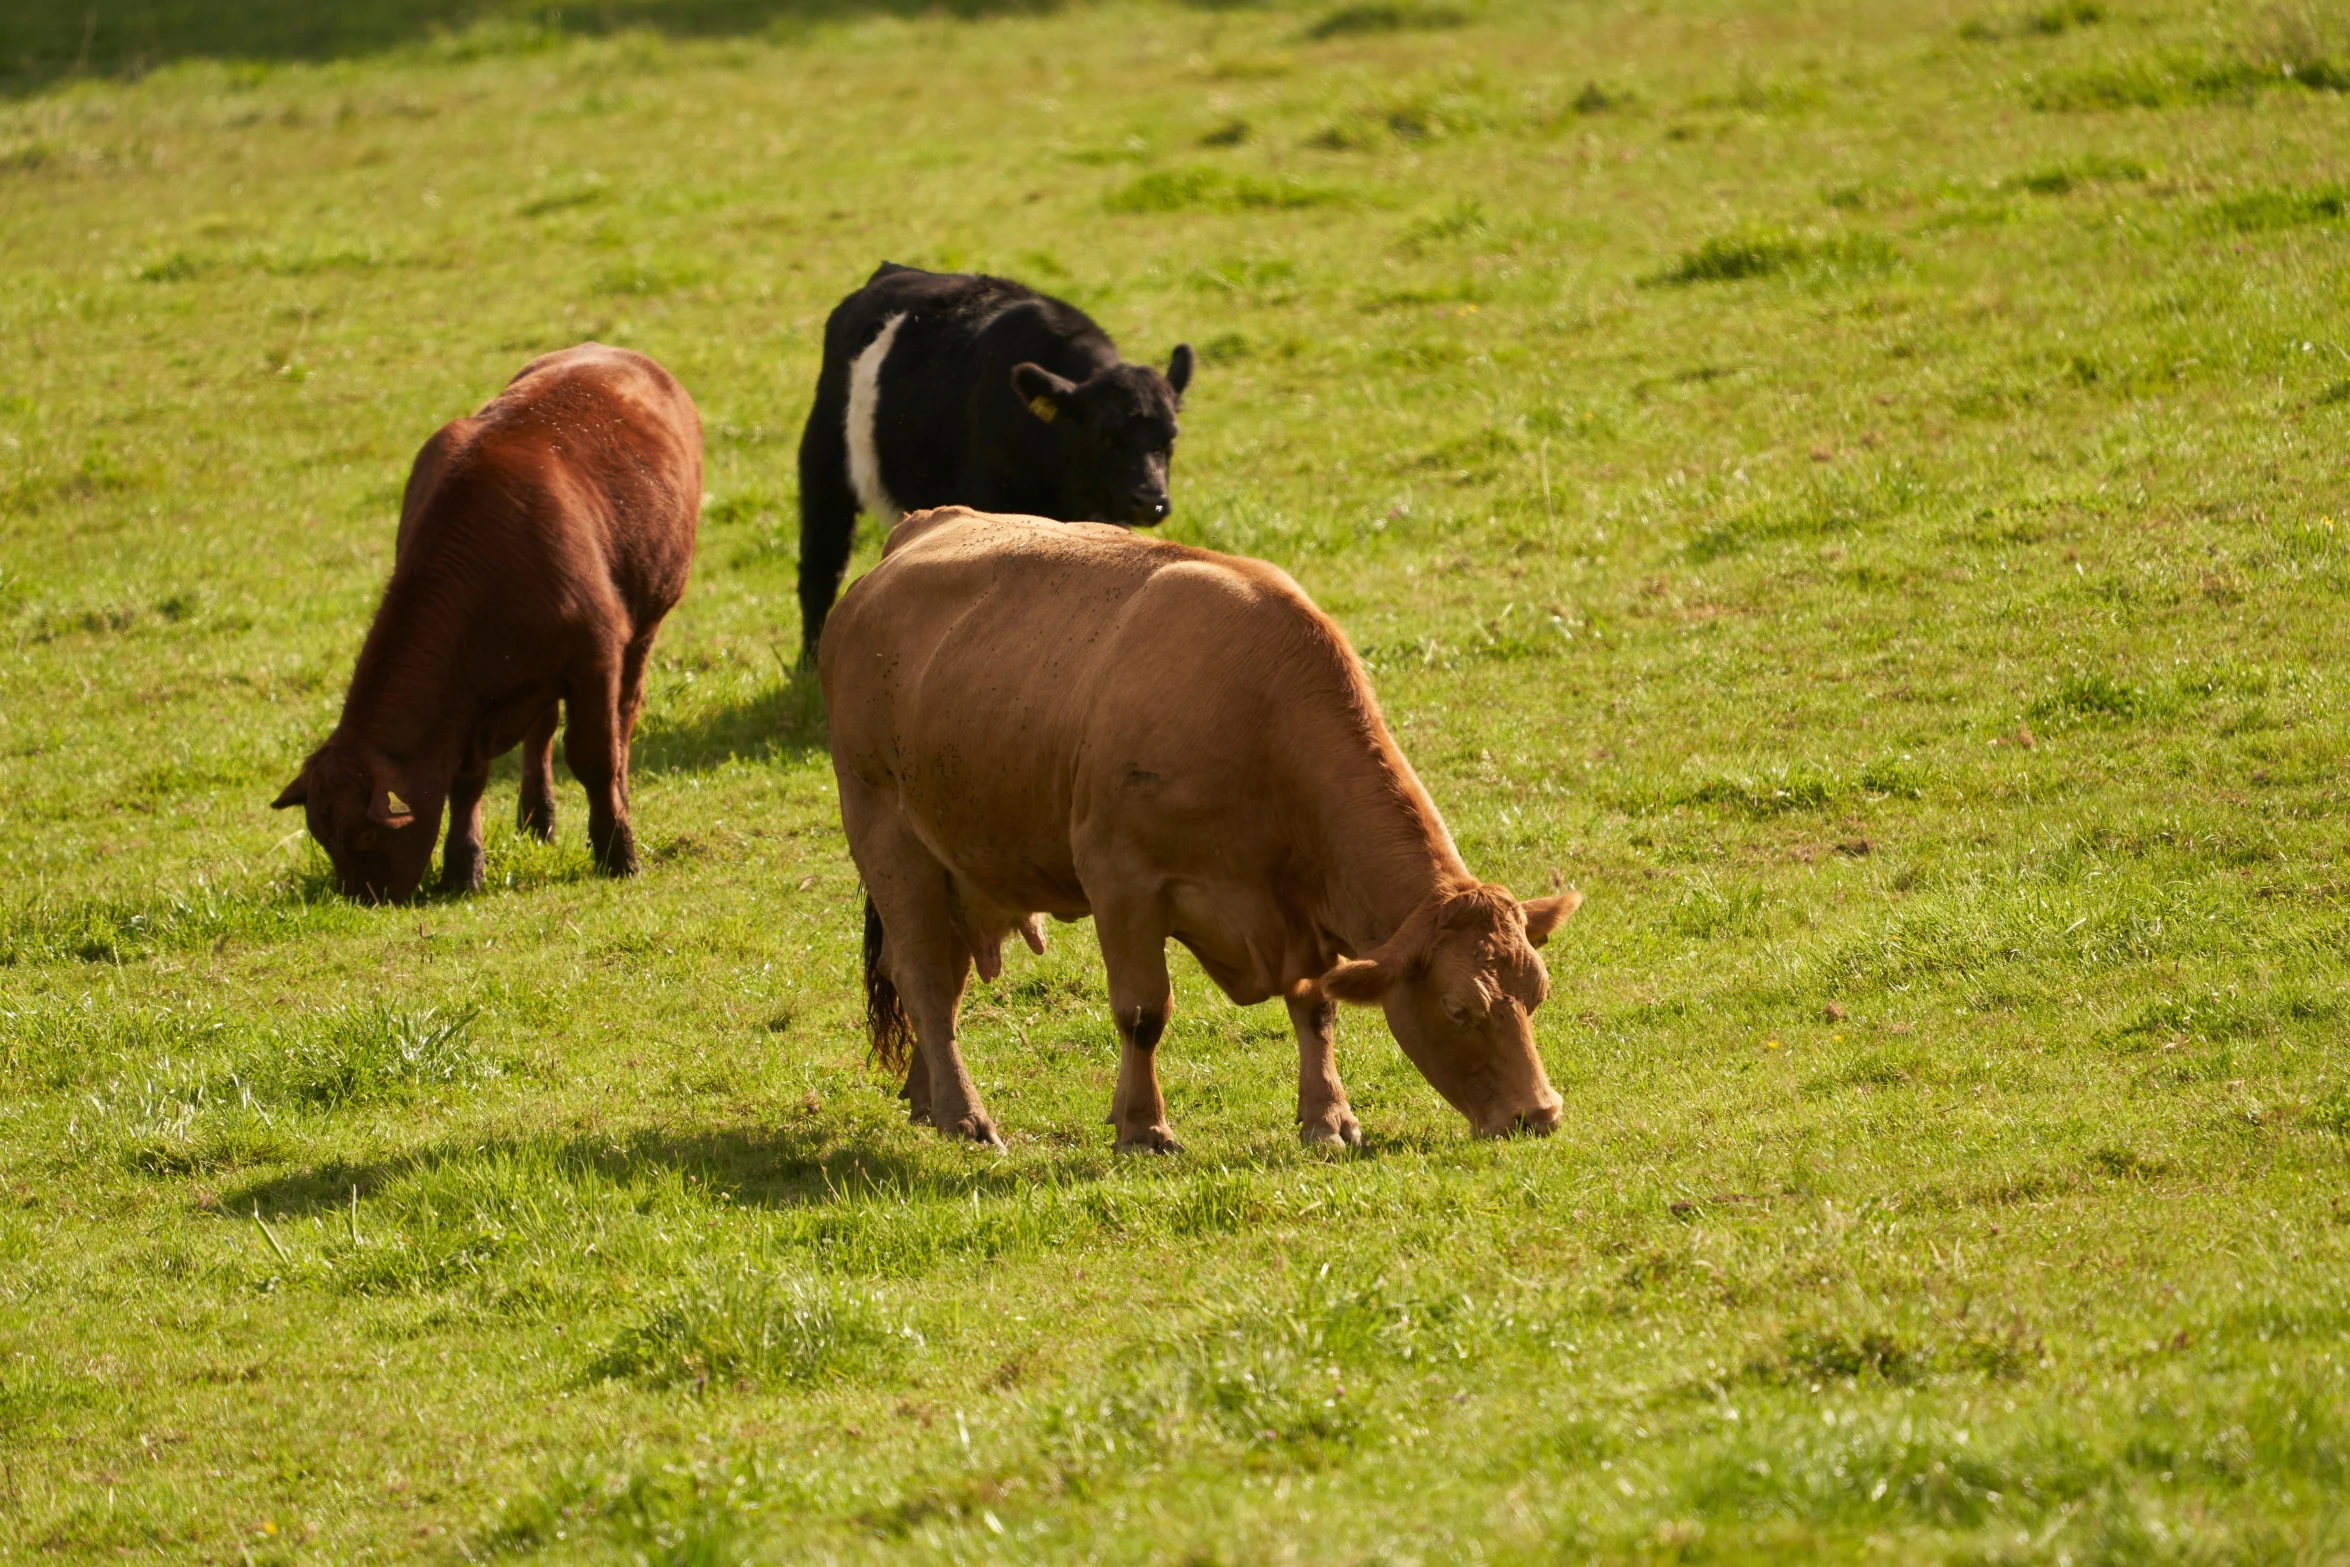 cows are grazing in a large pasture with green grass